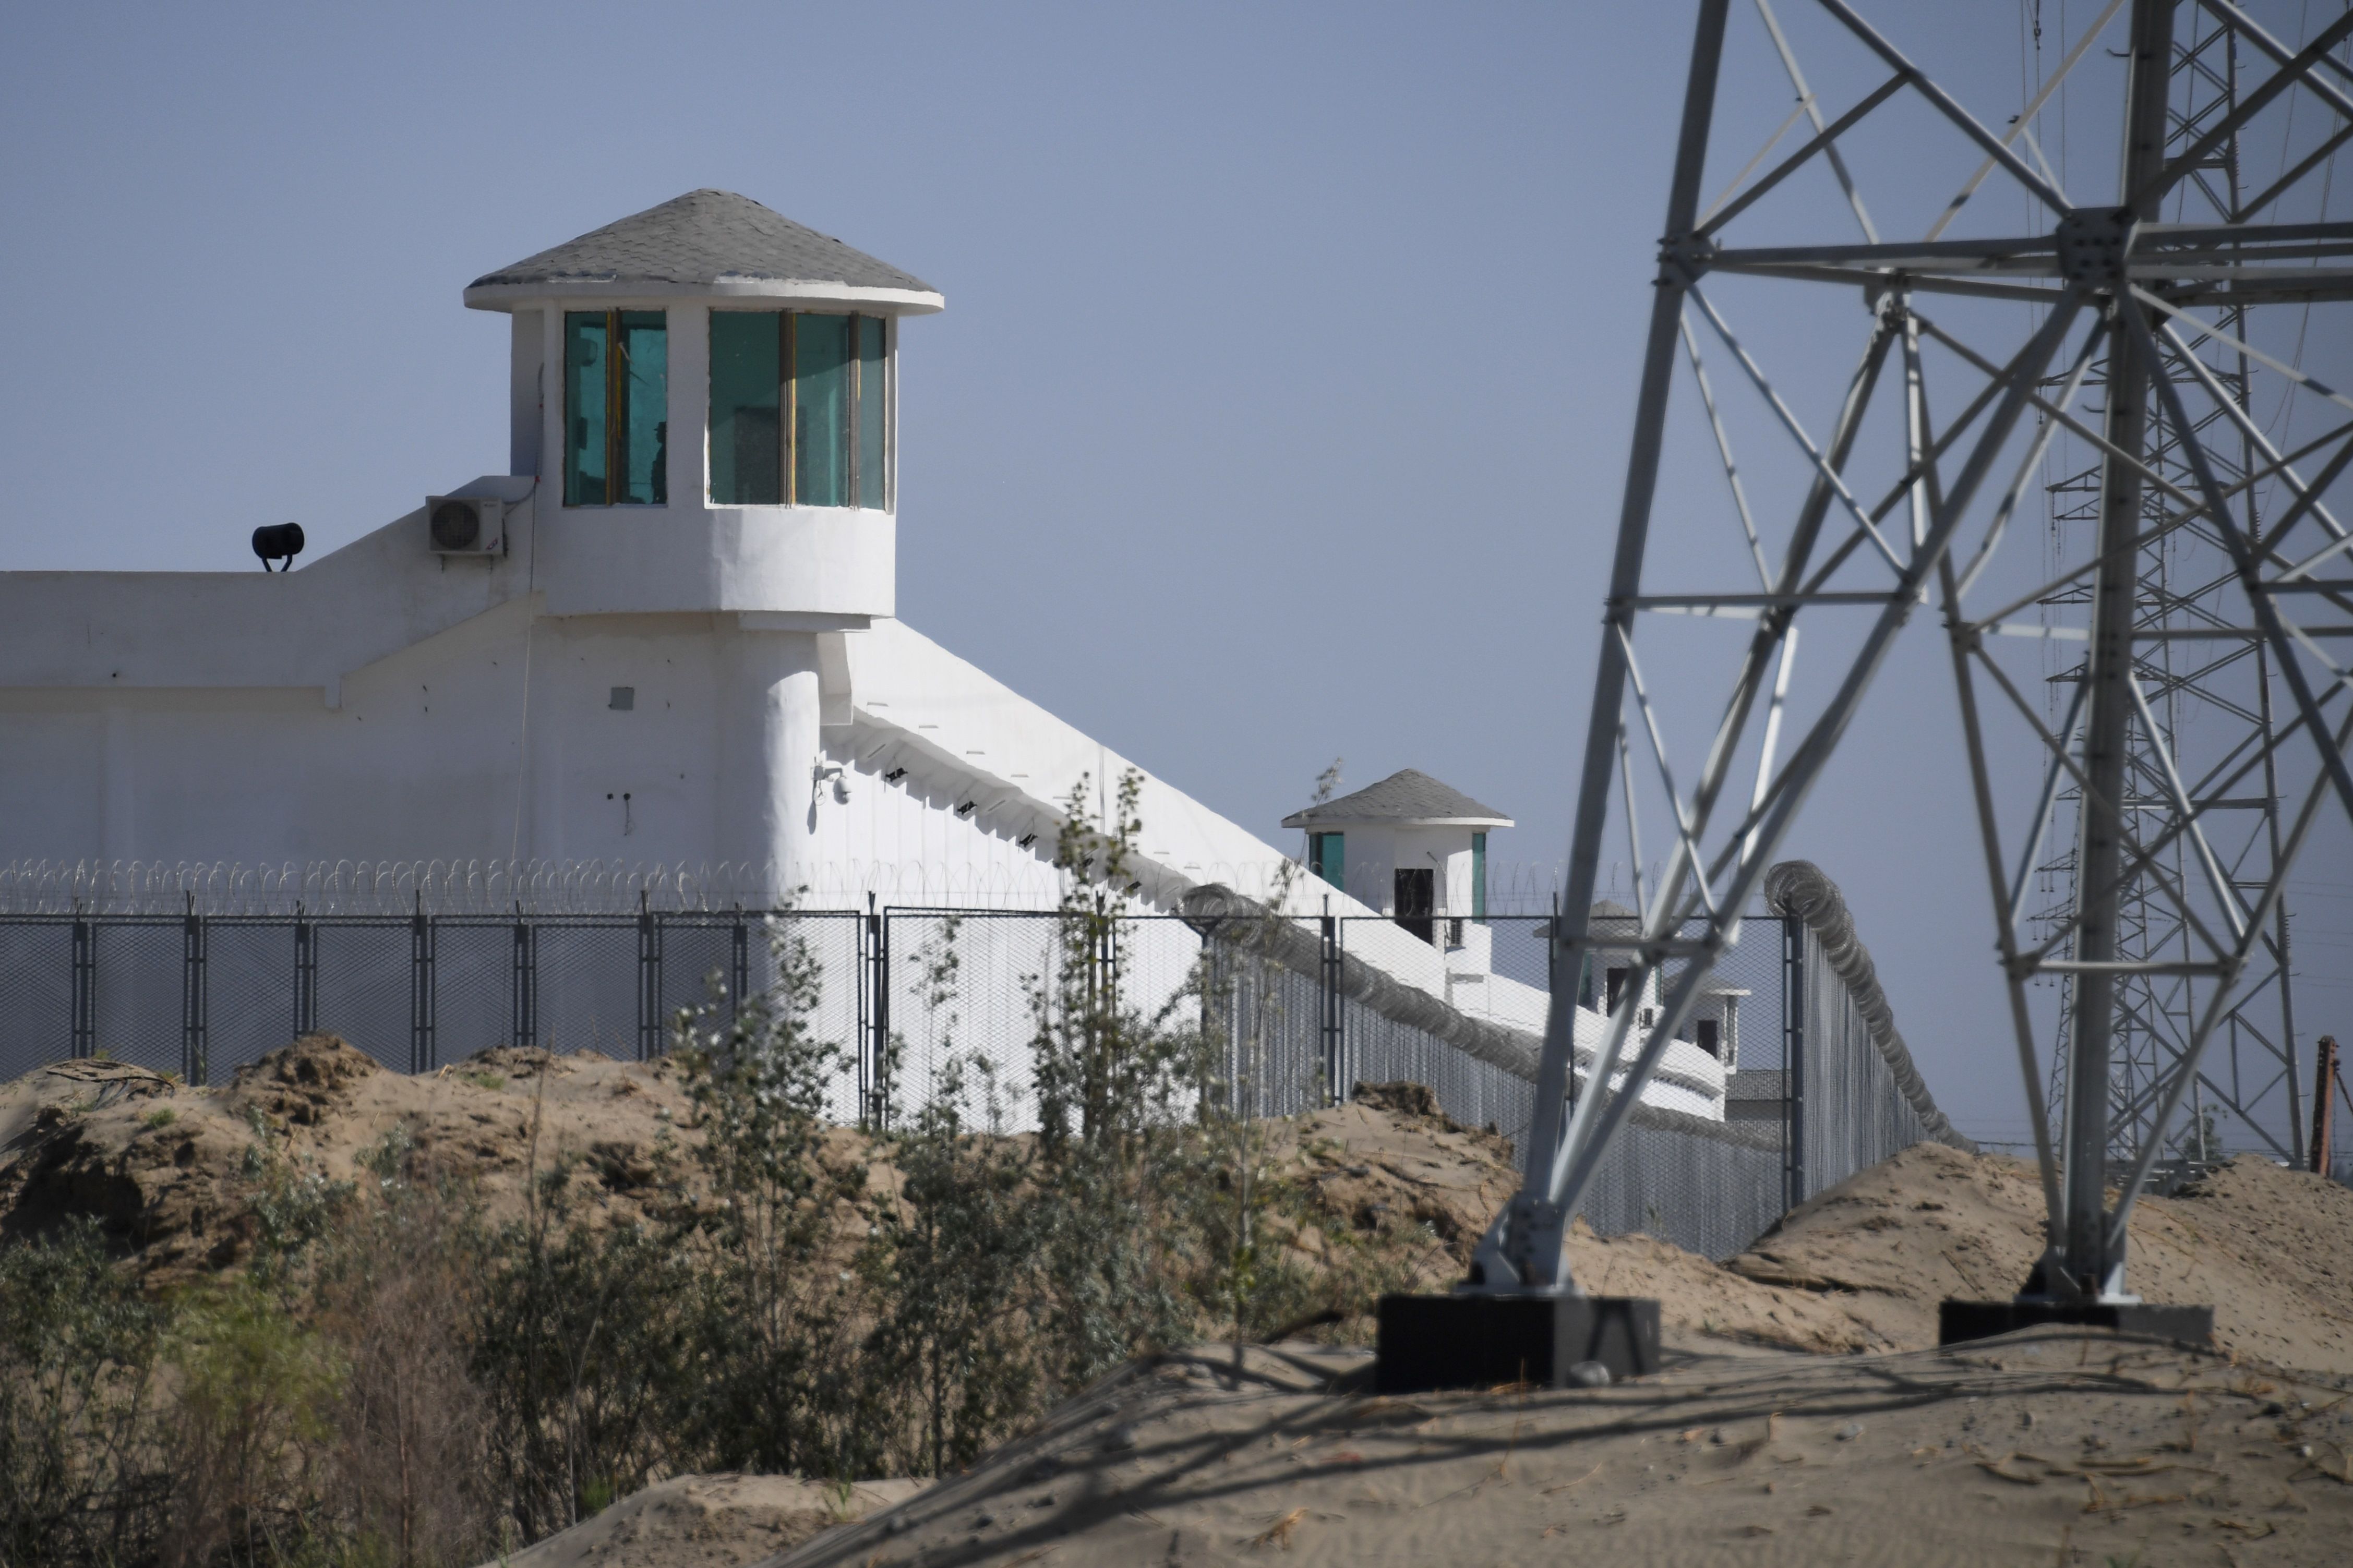 Watchtowers on a high-security facility near what is believed to be a re-education camp where mostly Muslim ethnic minority Uighurs are detained, on the outskirts of Hotan, Xinjiang 